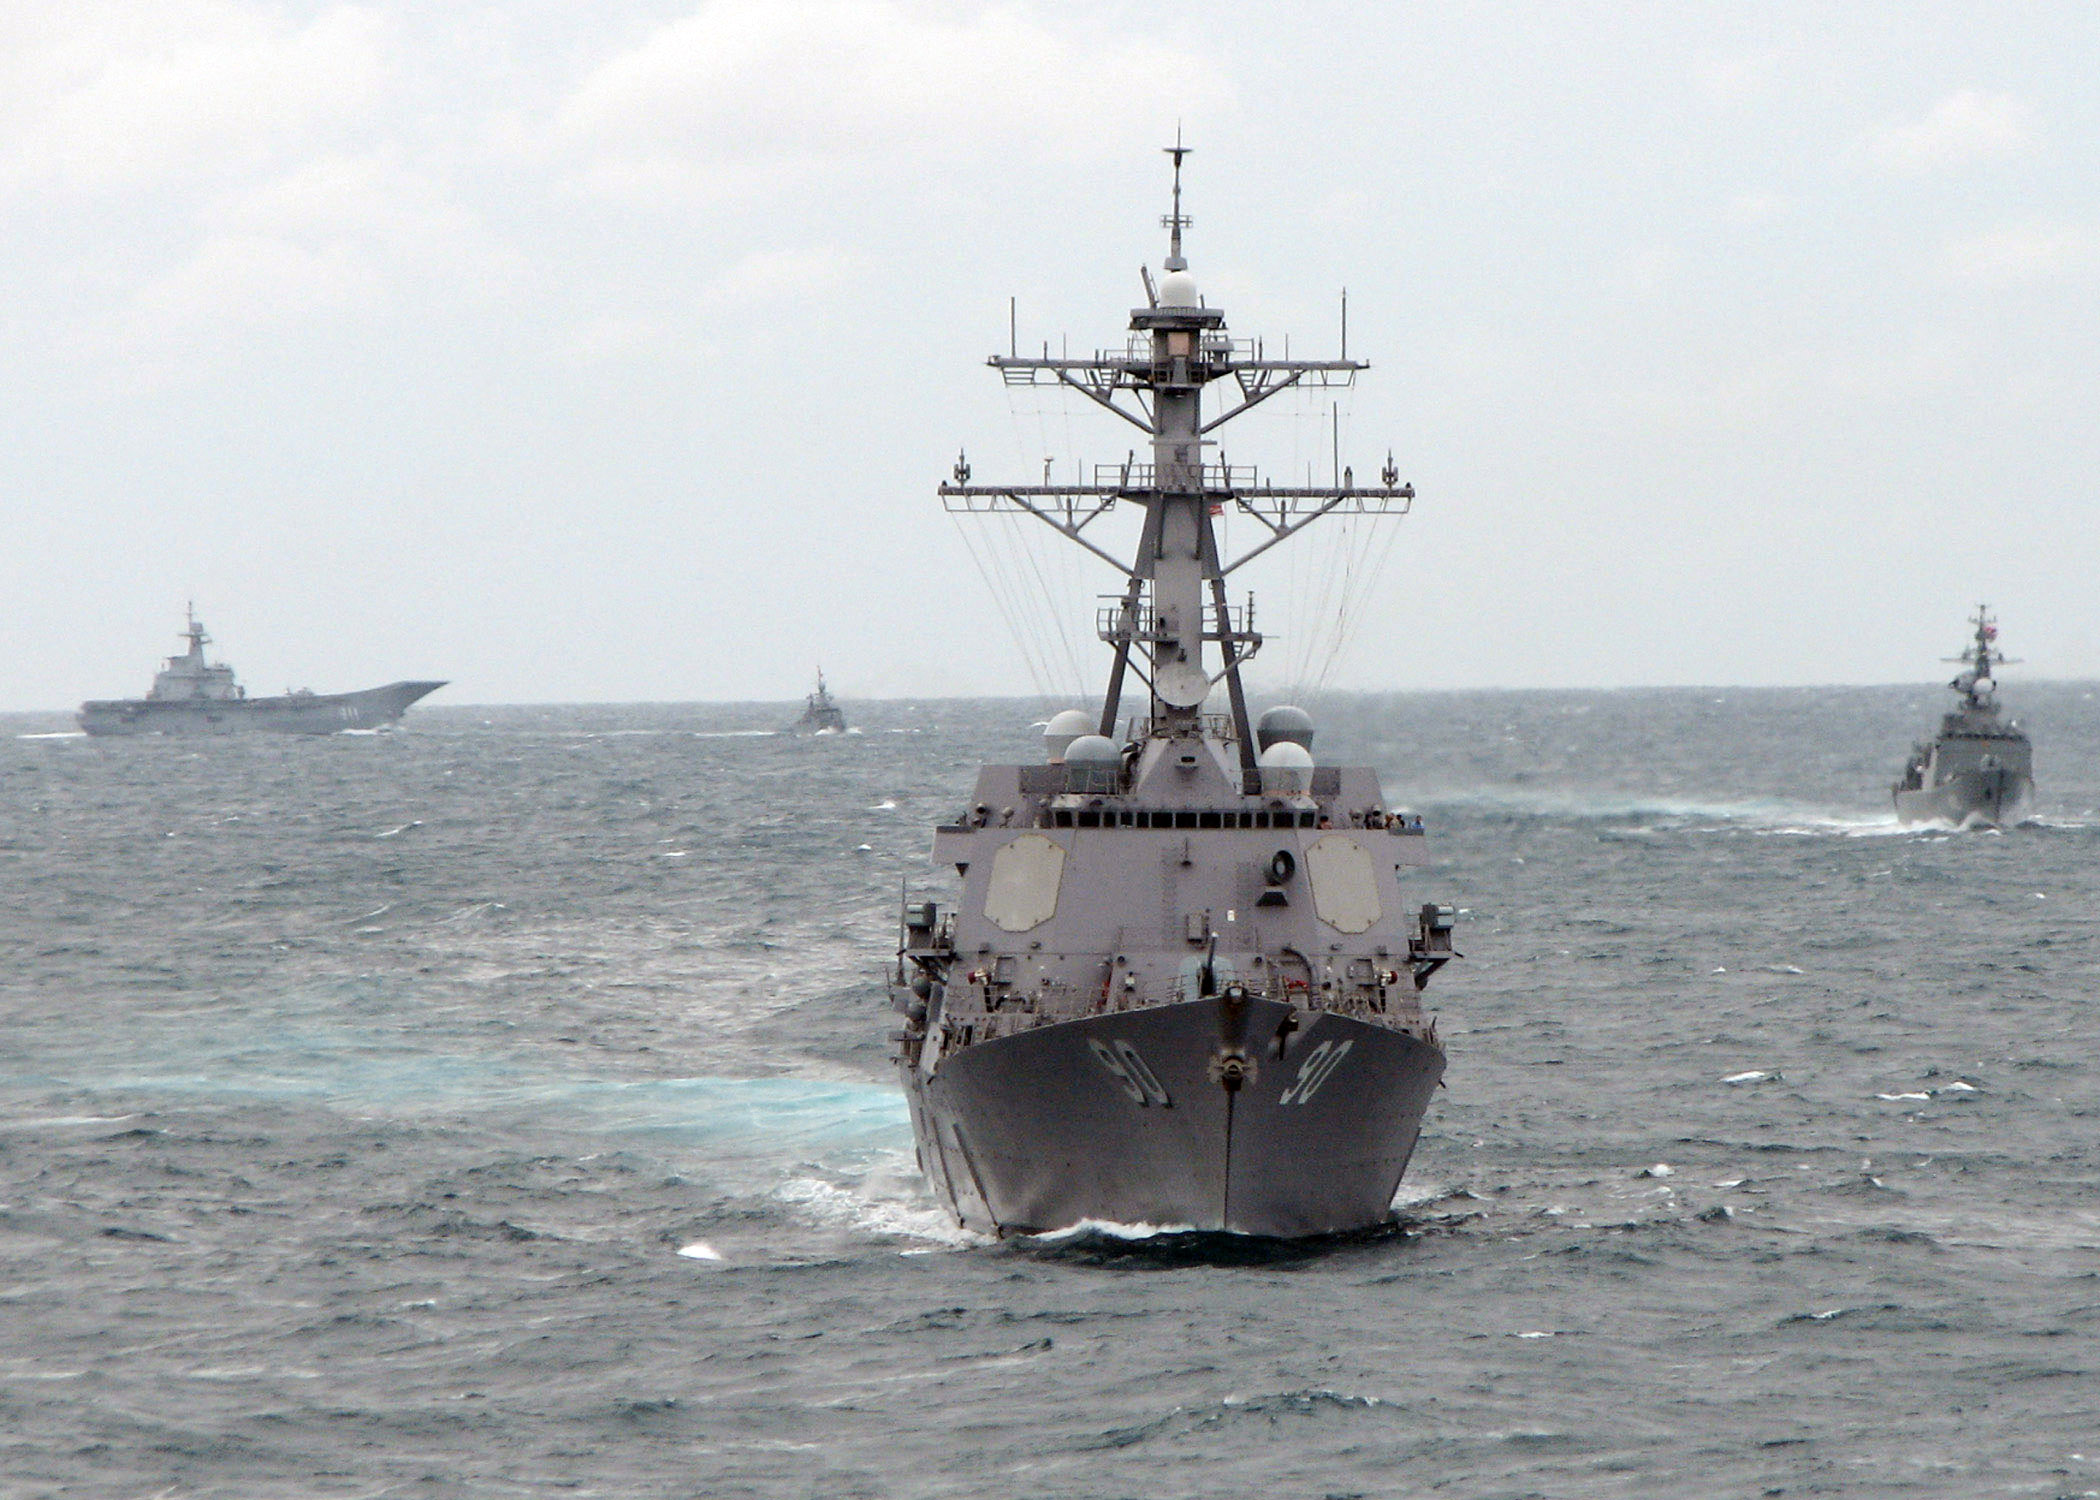 US_Navy_090713-N-7058E-148_The_guided-missile_destroyer_USS_Chafee_(DDG_90)_leads_a_formation_of_Royal_Thai_Navy_ships_including_HTMS_Chakri_Naruebet_(CVH_911),_HTMS_Khirrirat_(FS_432)_and_HTMS_Naresuan_(FFG_421).jpg